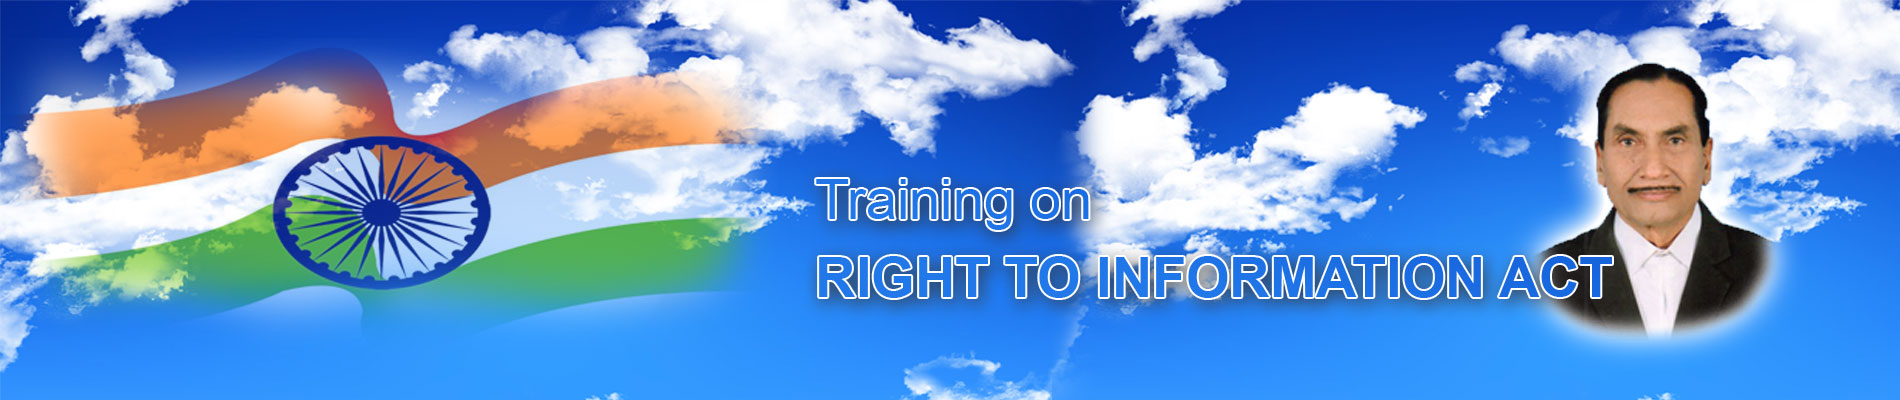 Right to Information Act (India) | Training on RTI | RTI Training